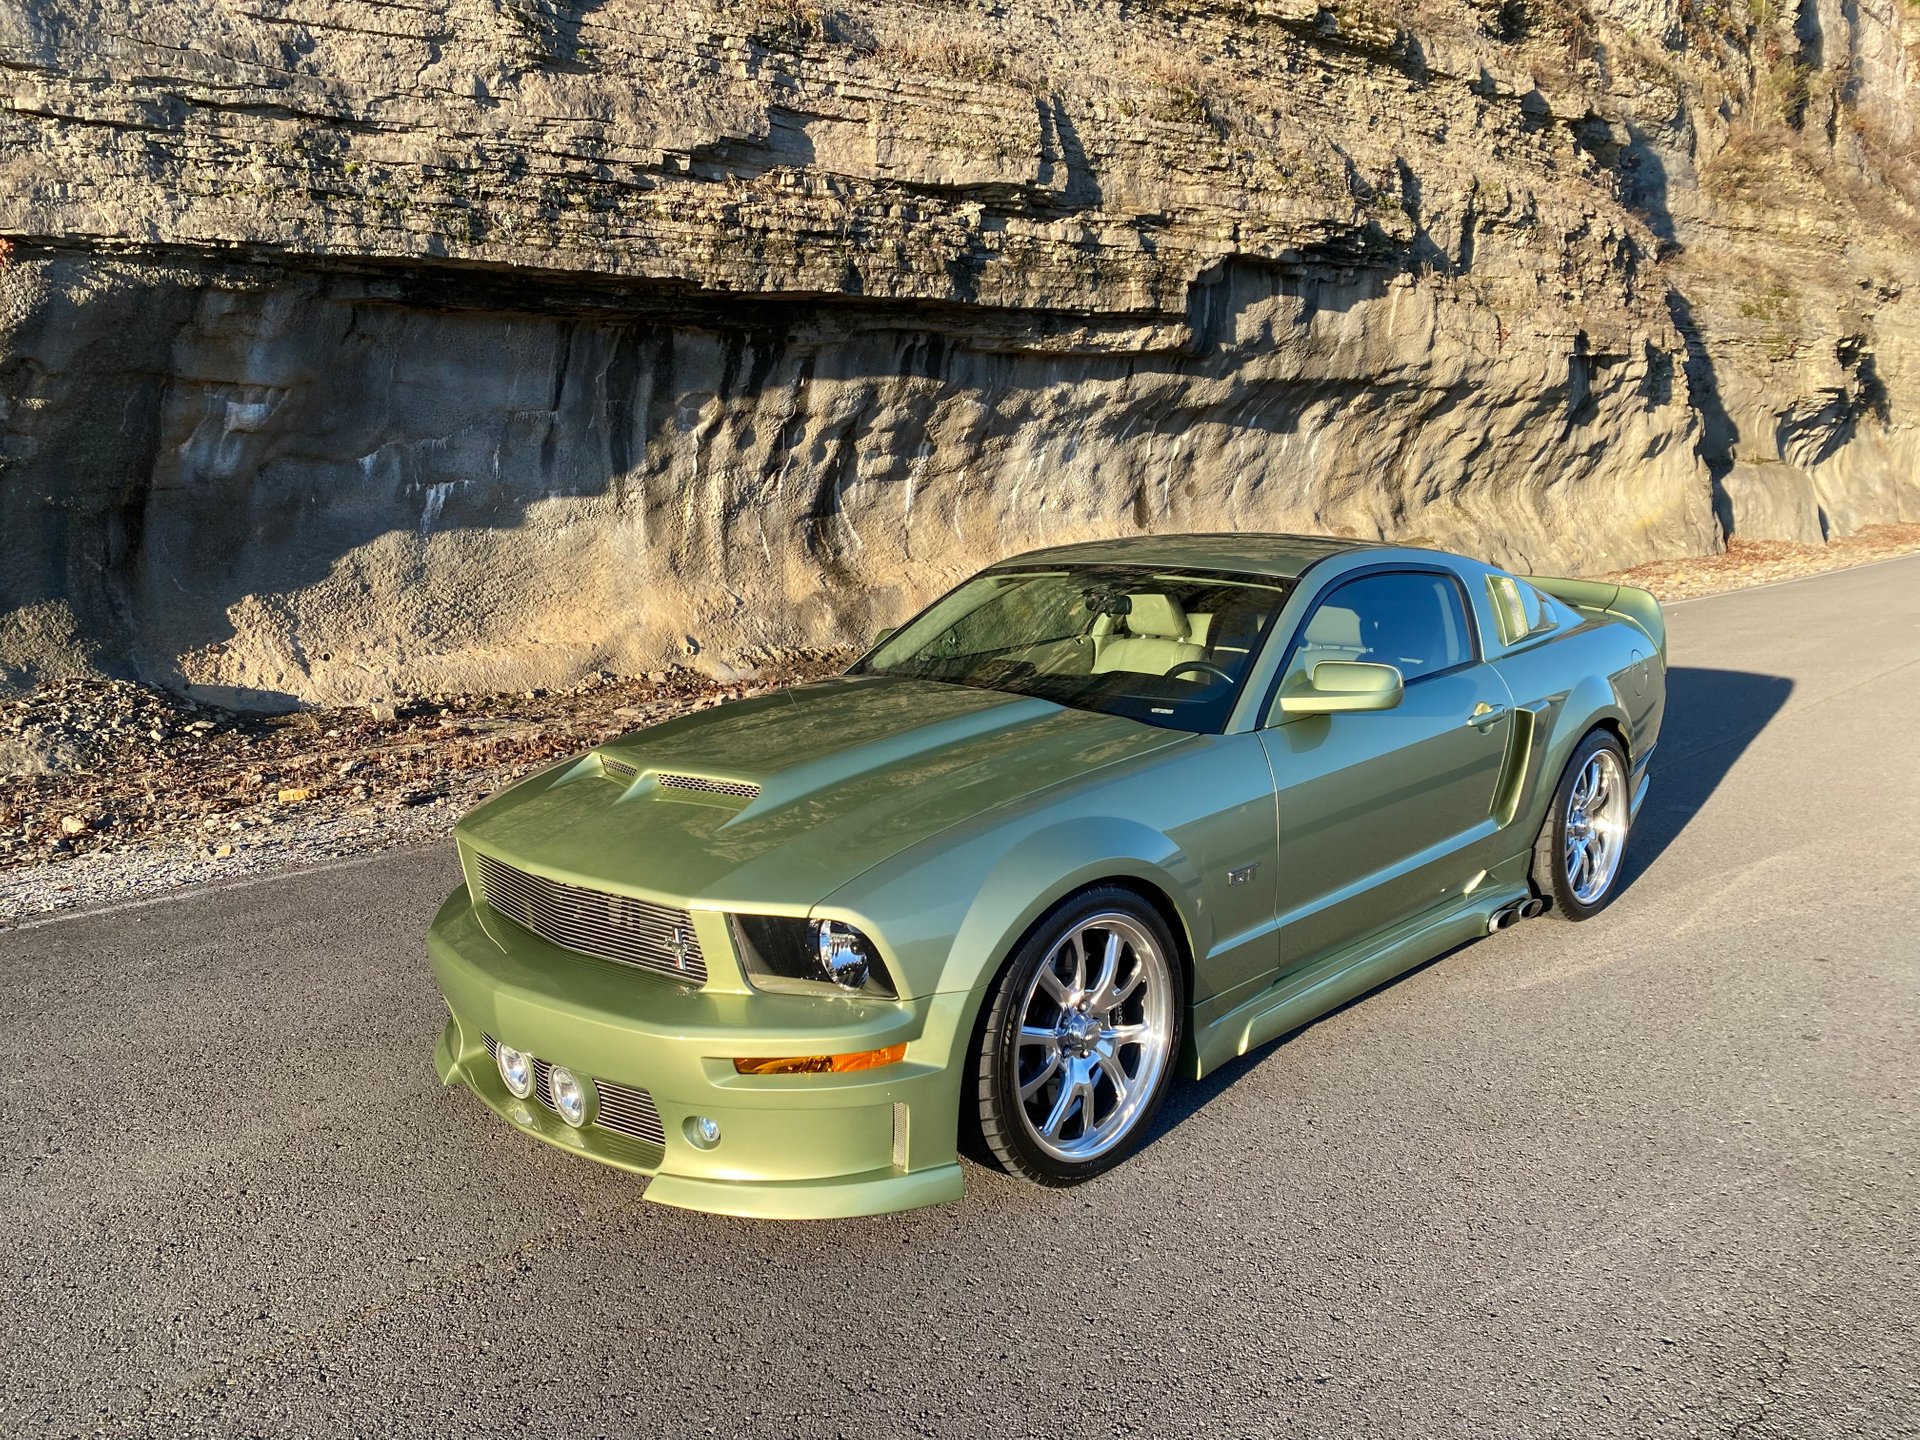 2006 ford mustang gt